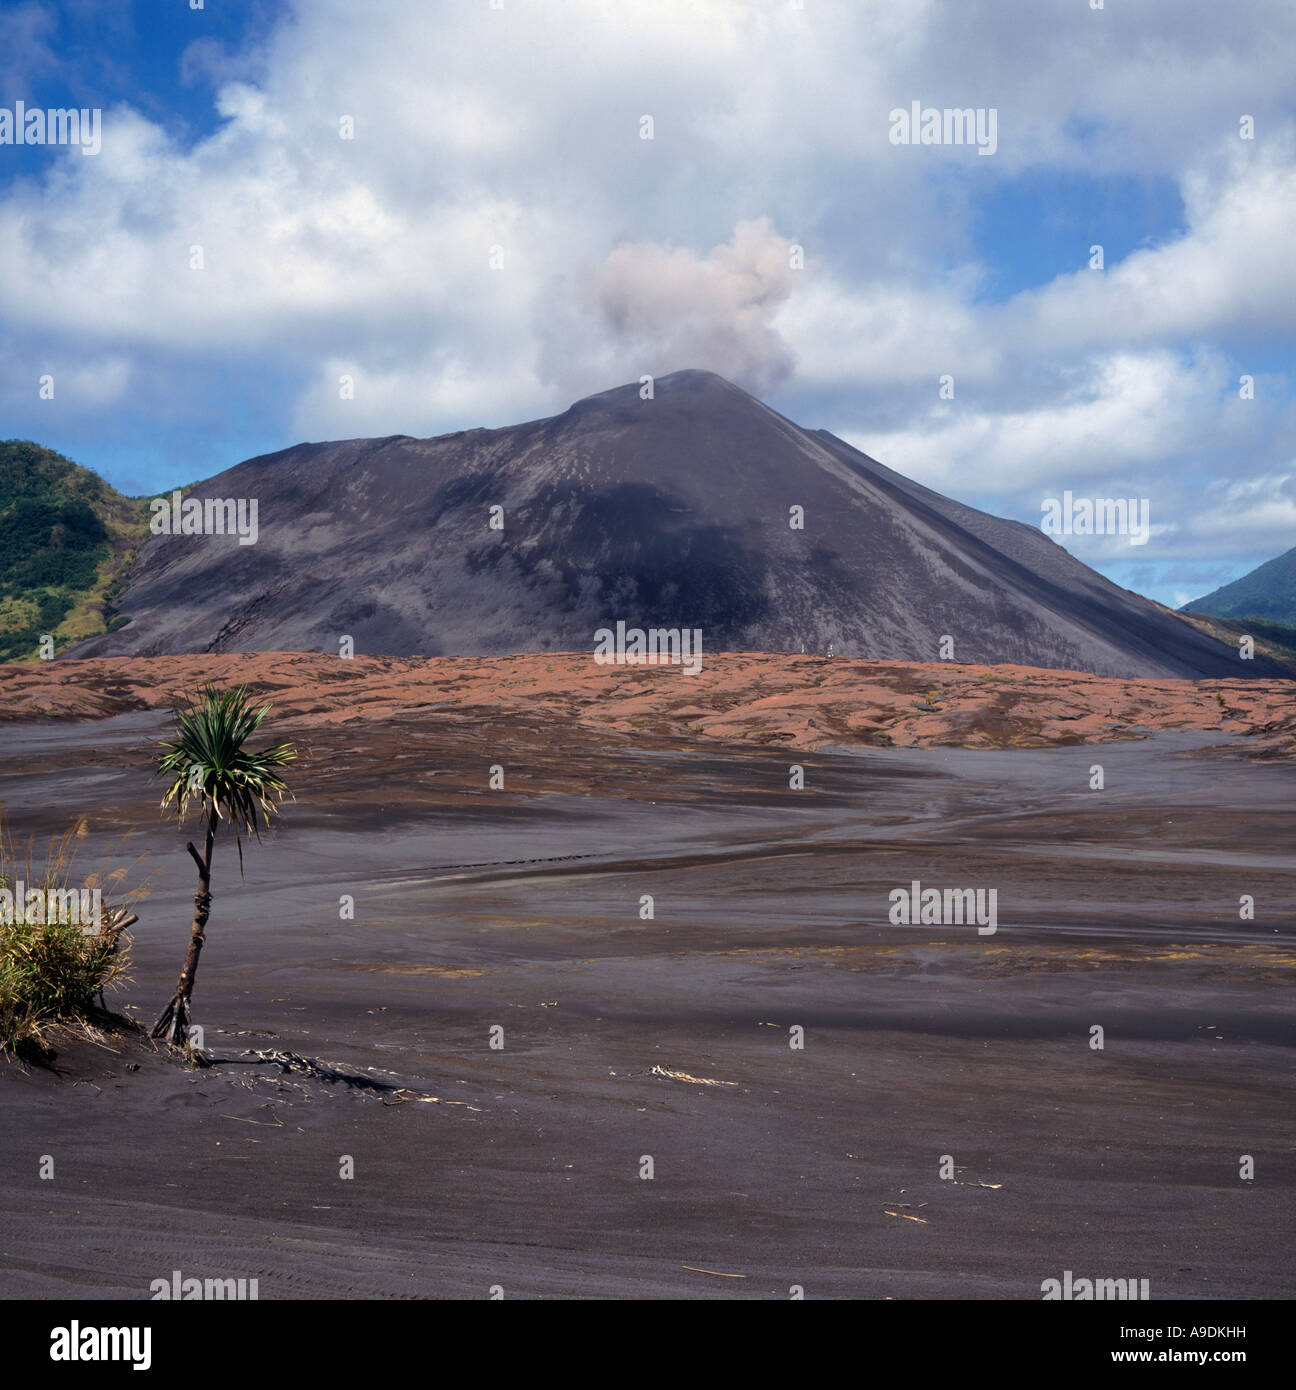 Ash plains and lone pandanus palm tree at foot of Mount Yasur Volcano on Tanna Island in Vanuatu Island Group the South Pacific Stock Photo